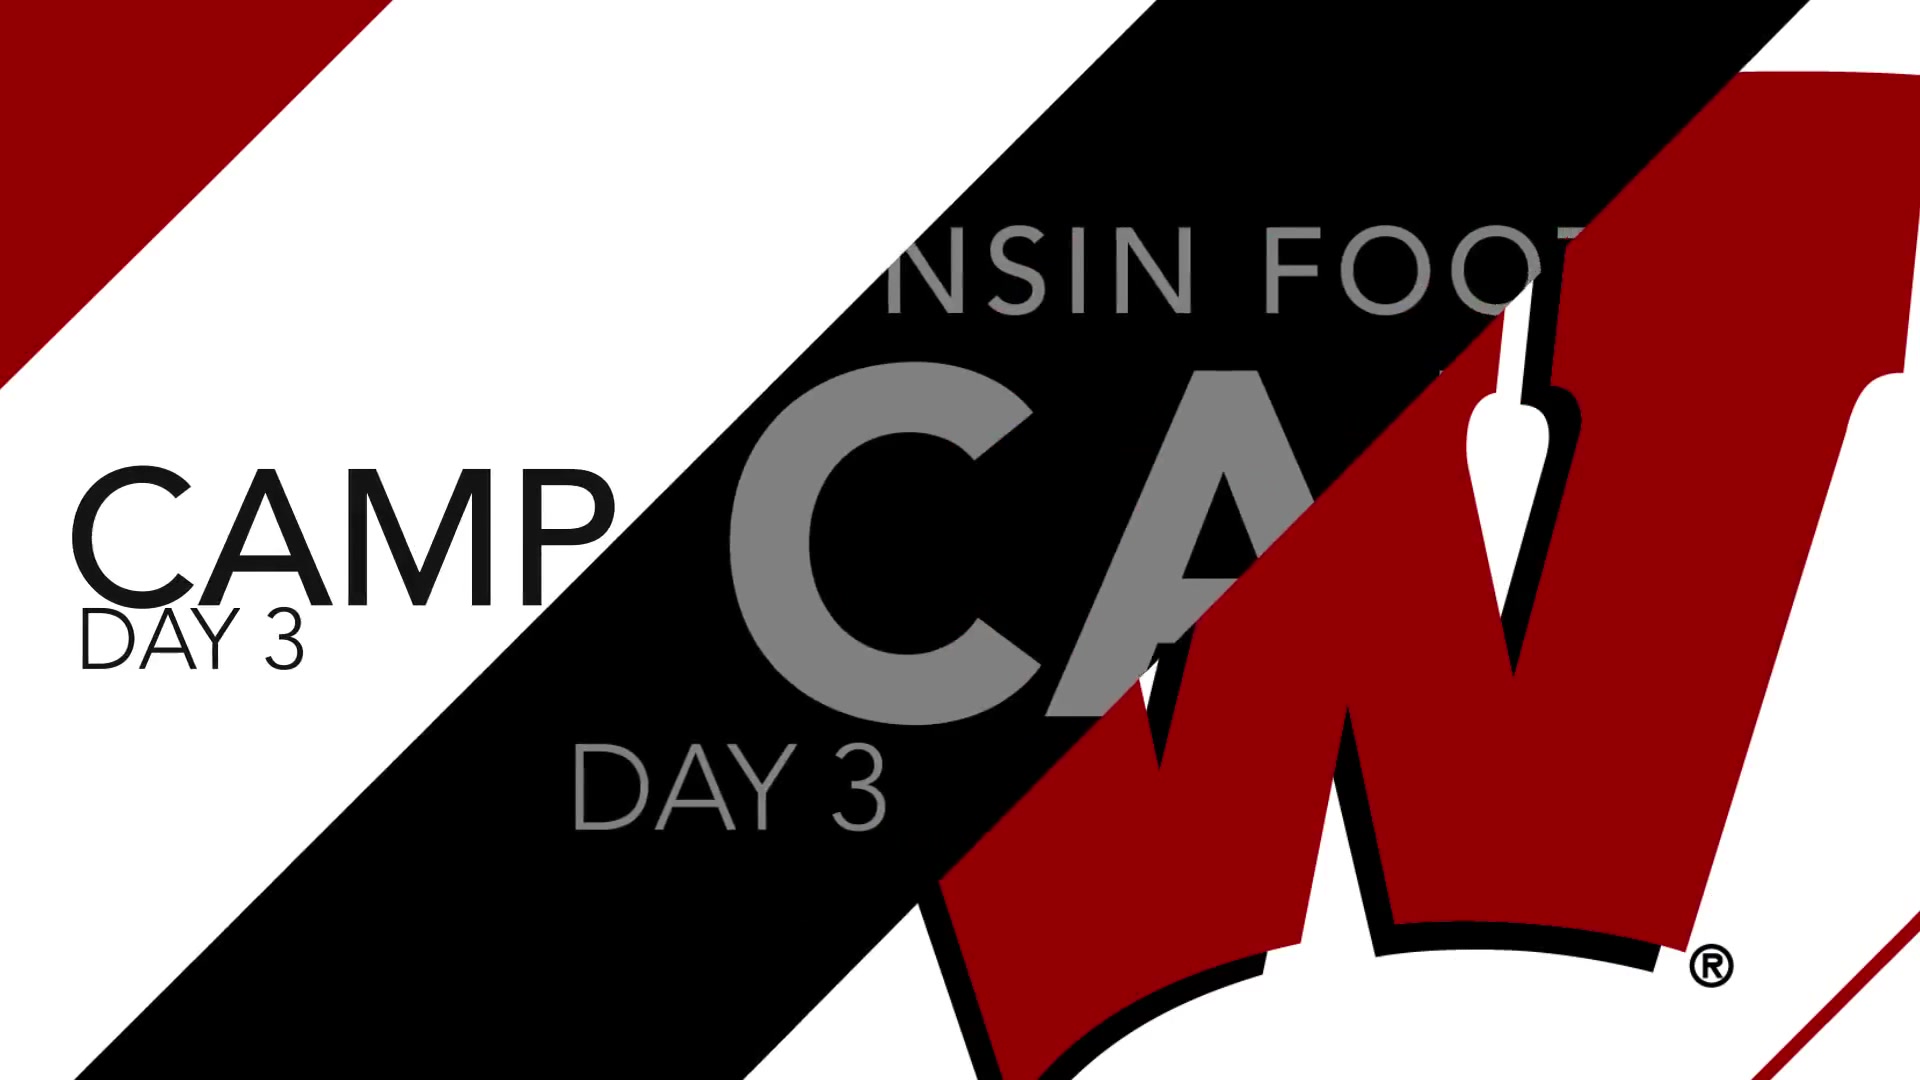 Wisconsin Football Fall Camp 2015: Day 3